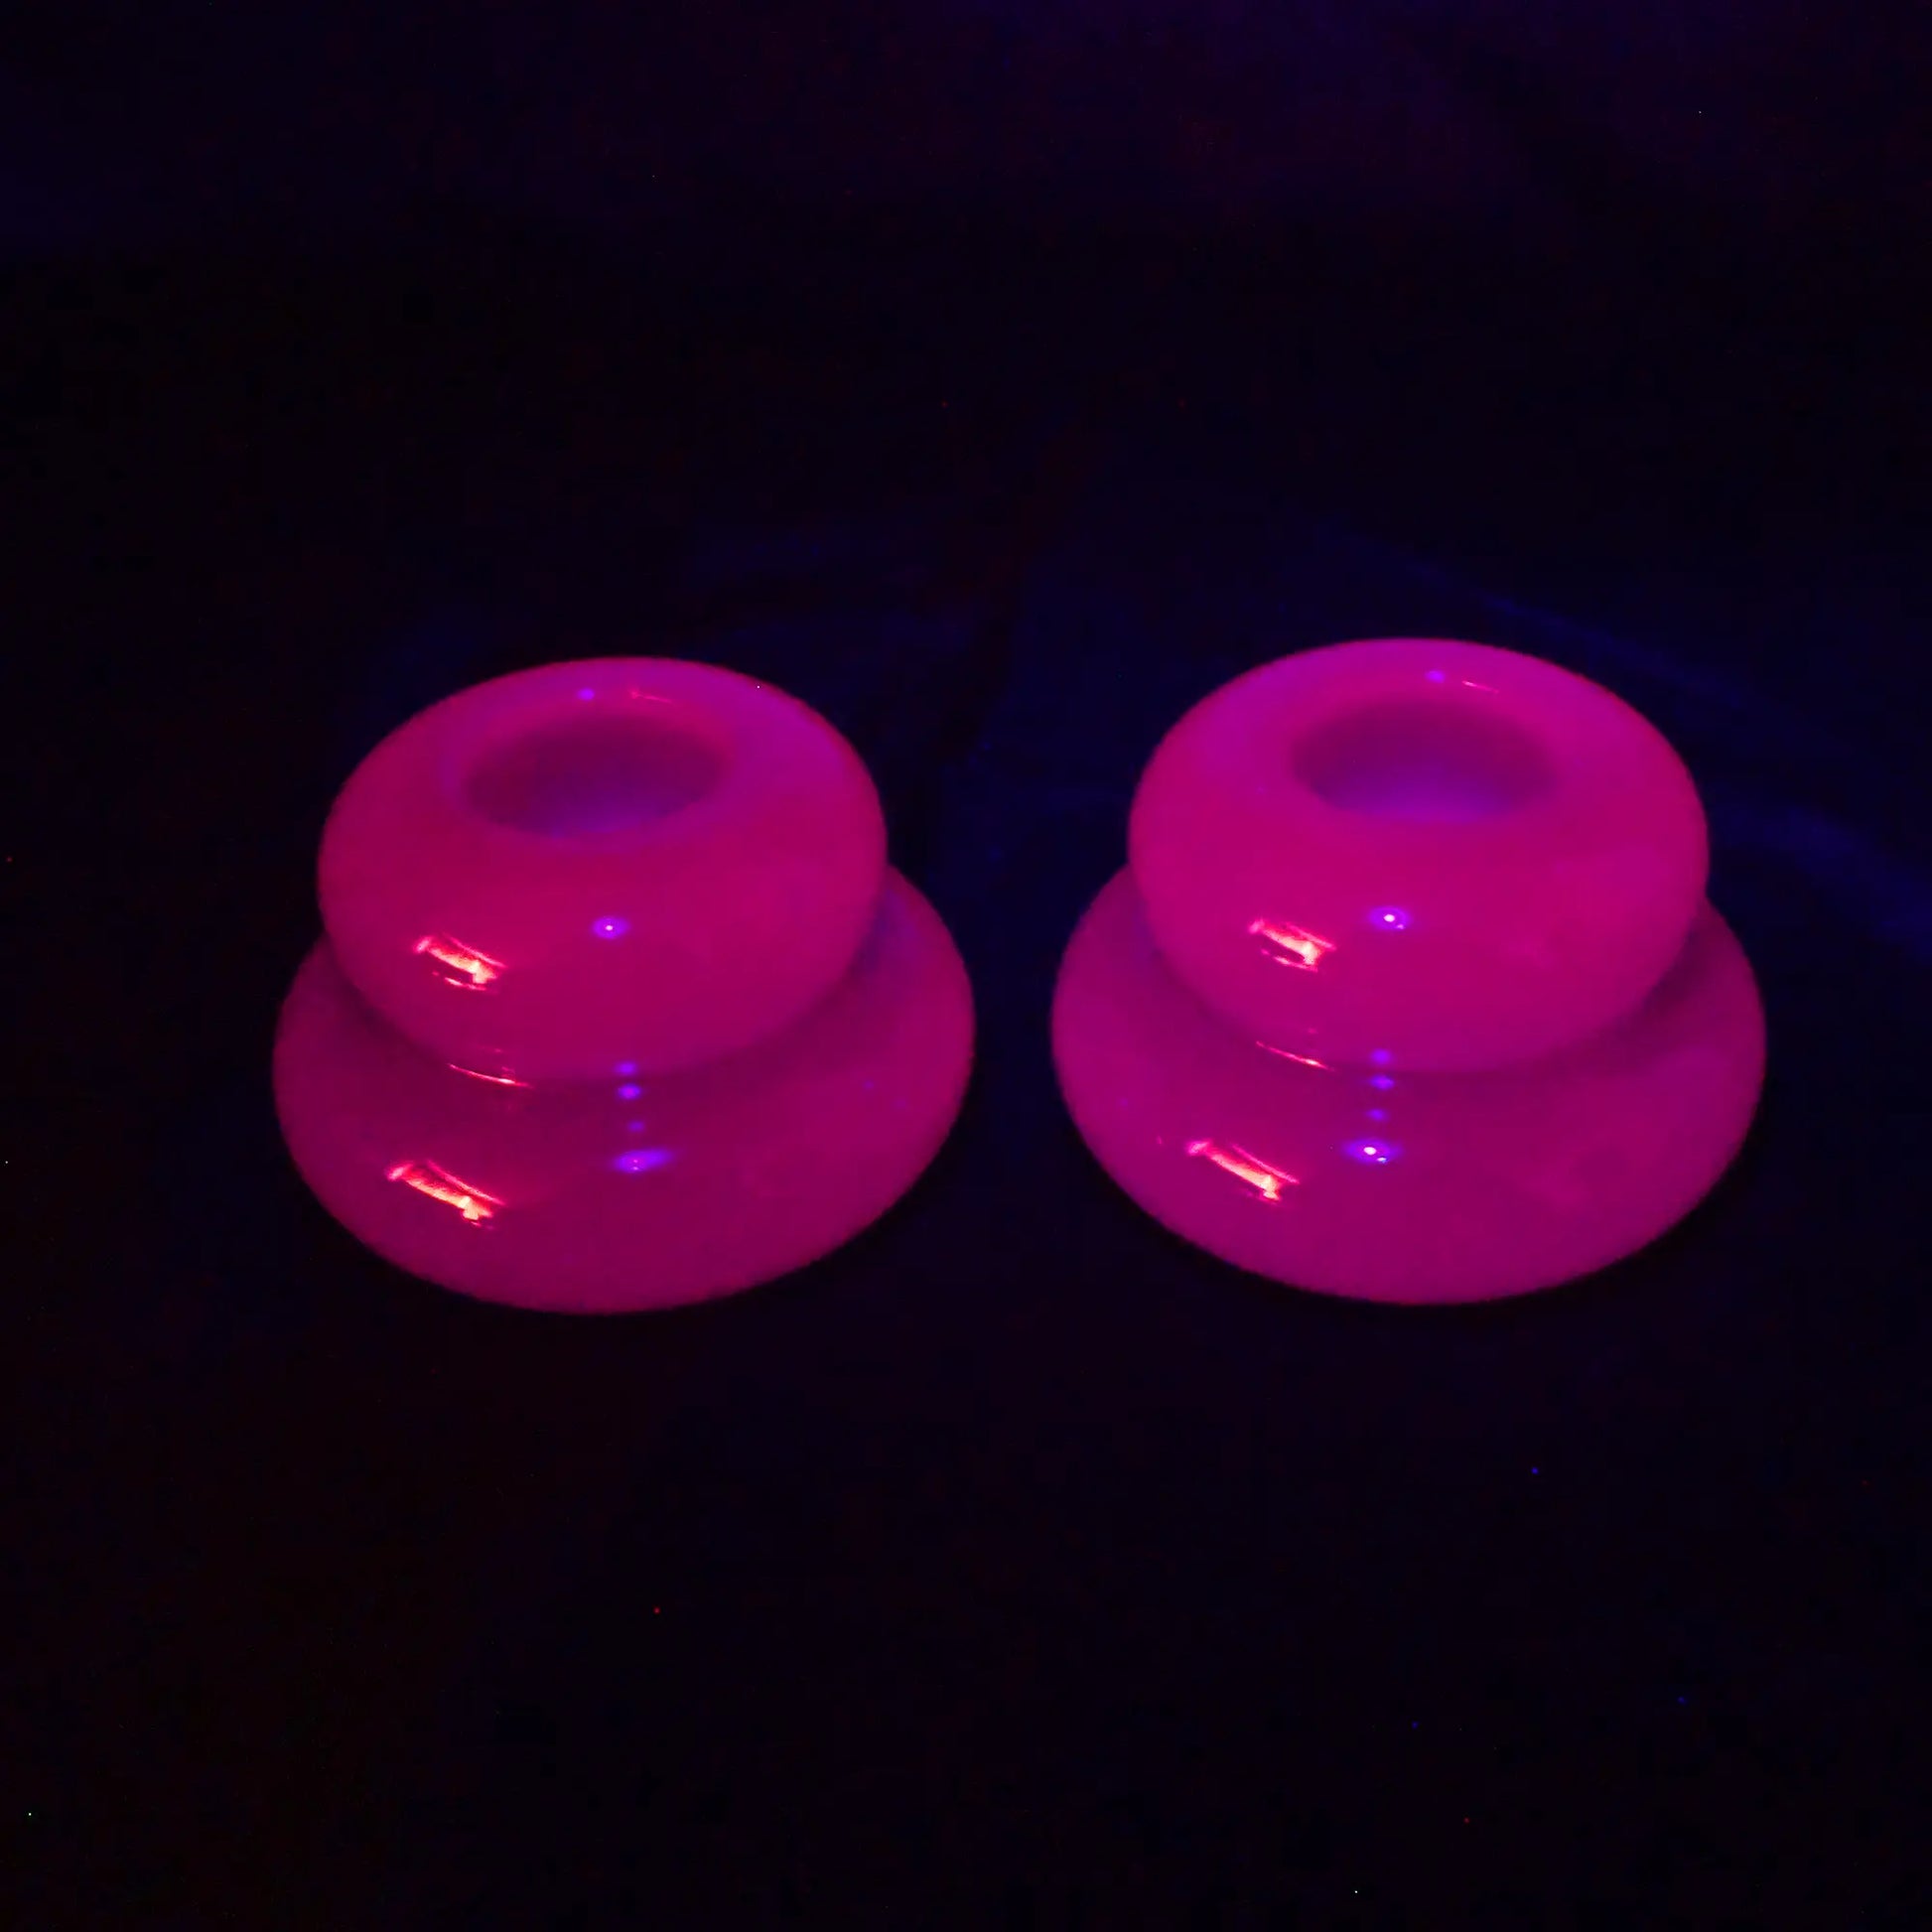 Photo of the neon purple handmade resin puffy round double ring candlestick holders fluorescing pink under a UV light.